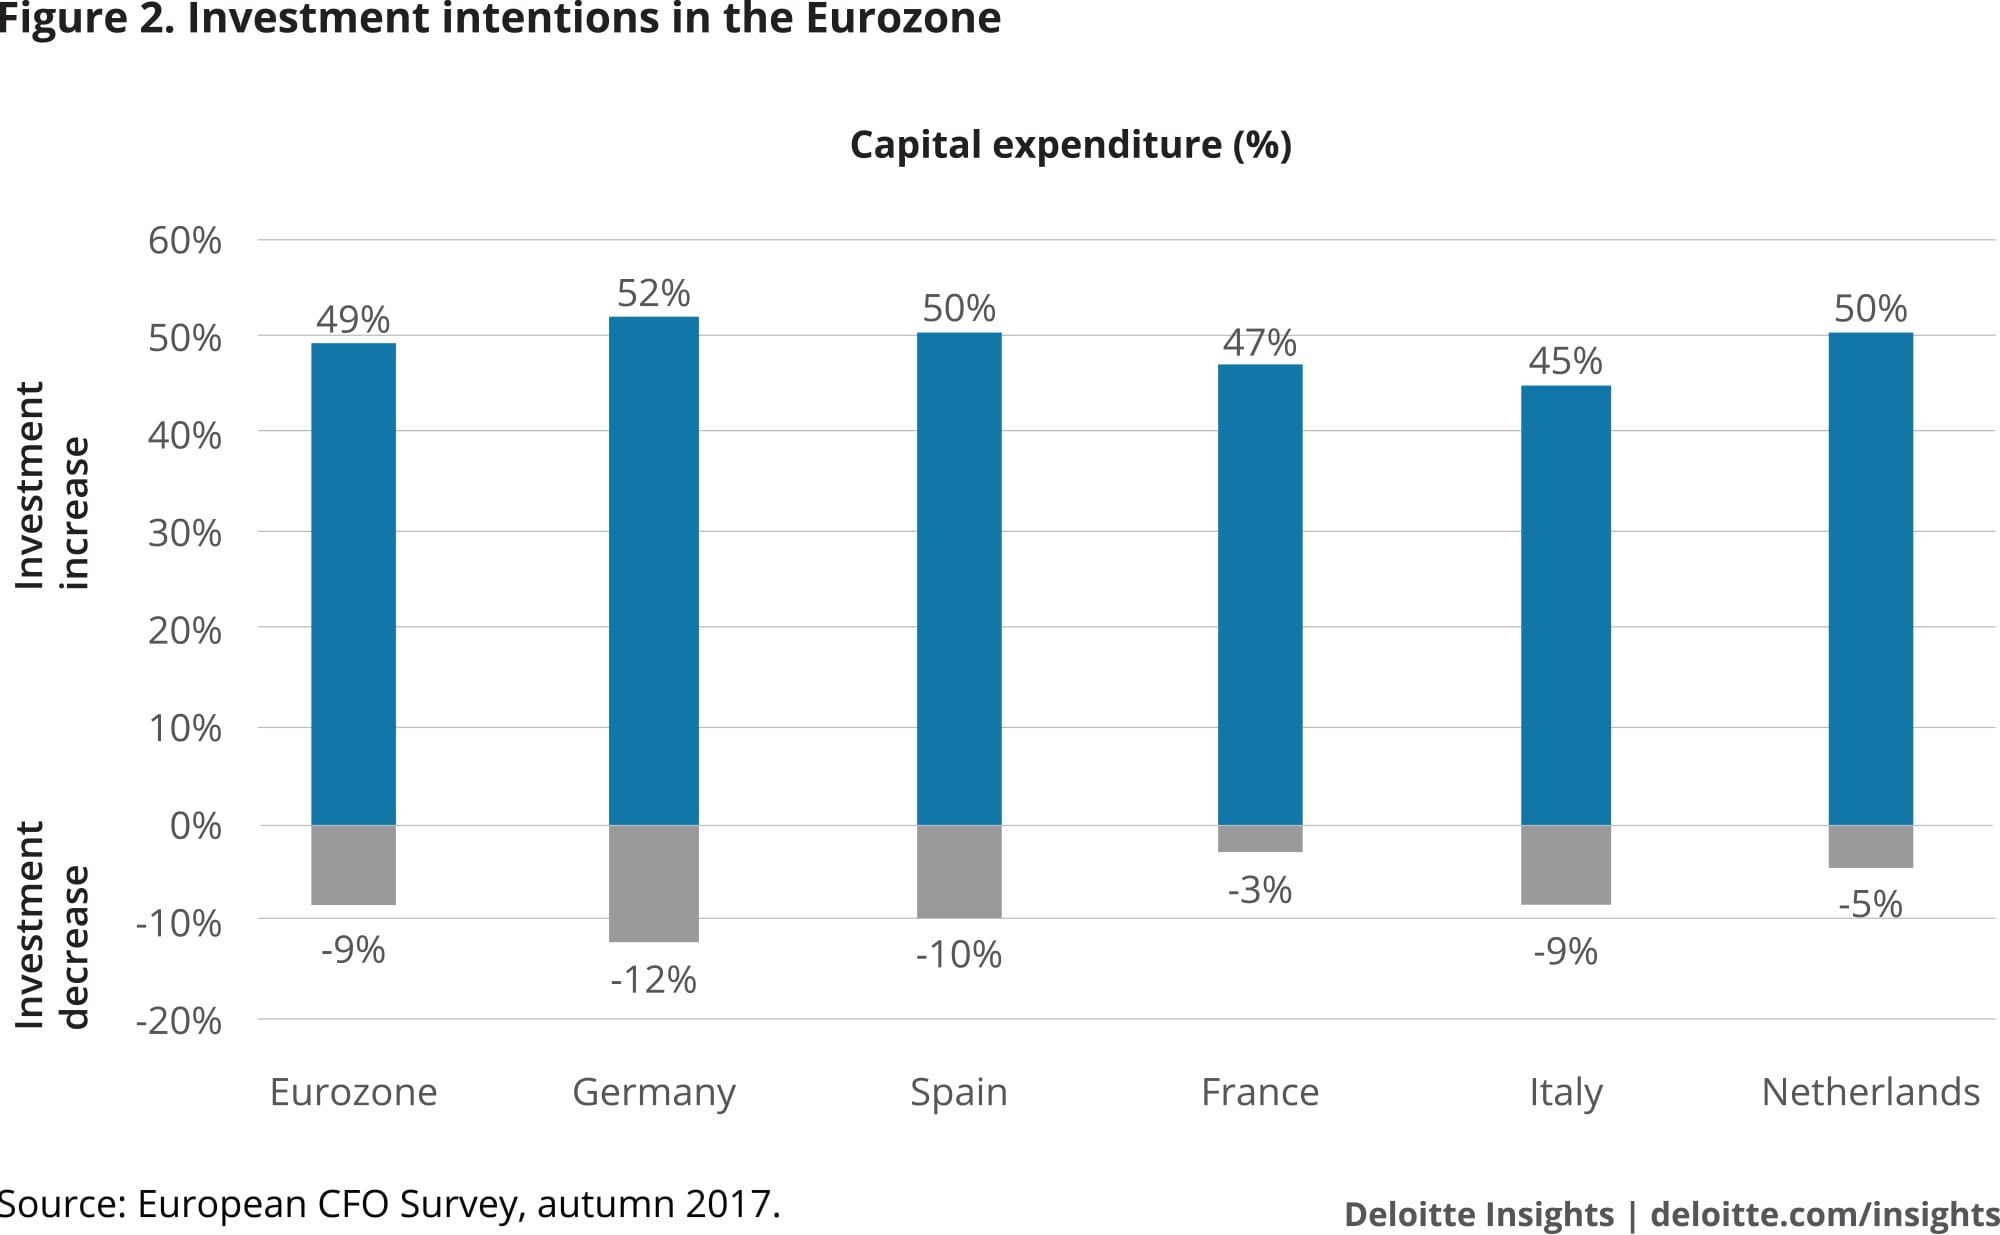 Investment intentions in the Eurozone